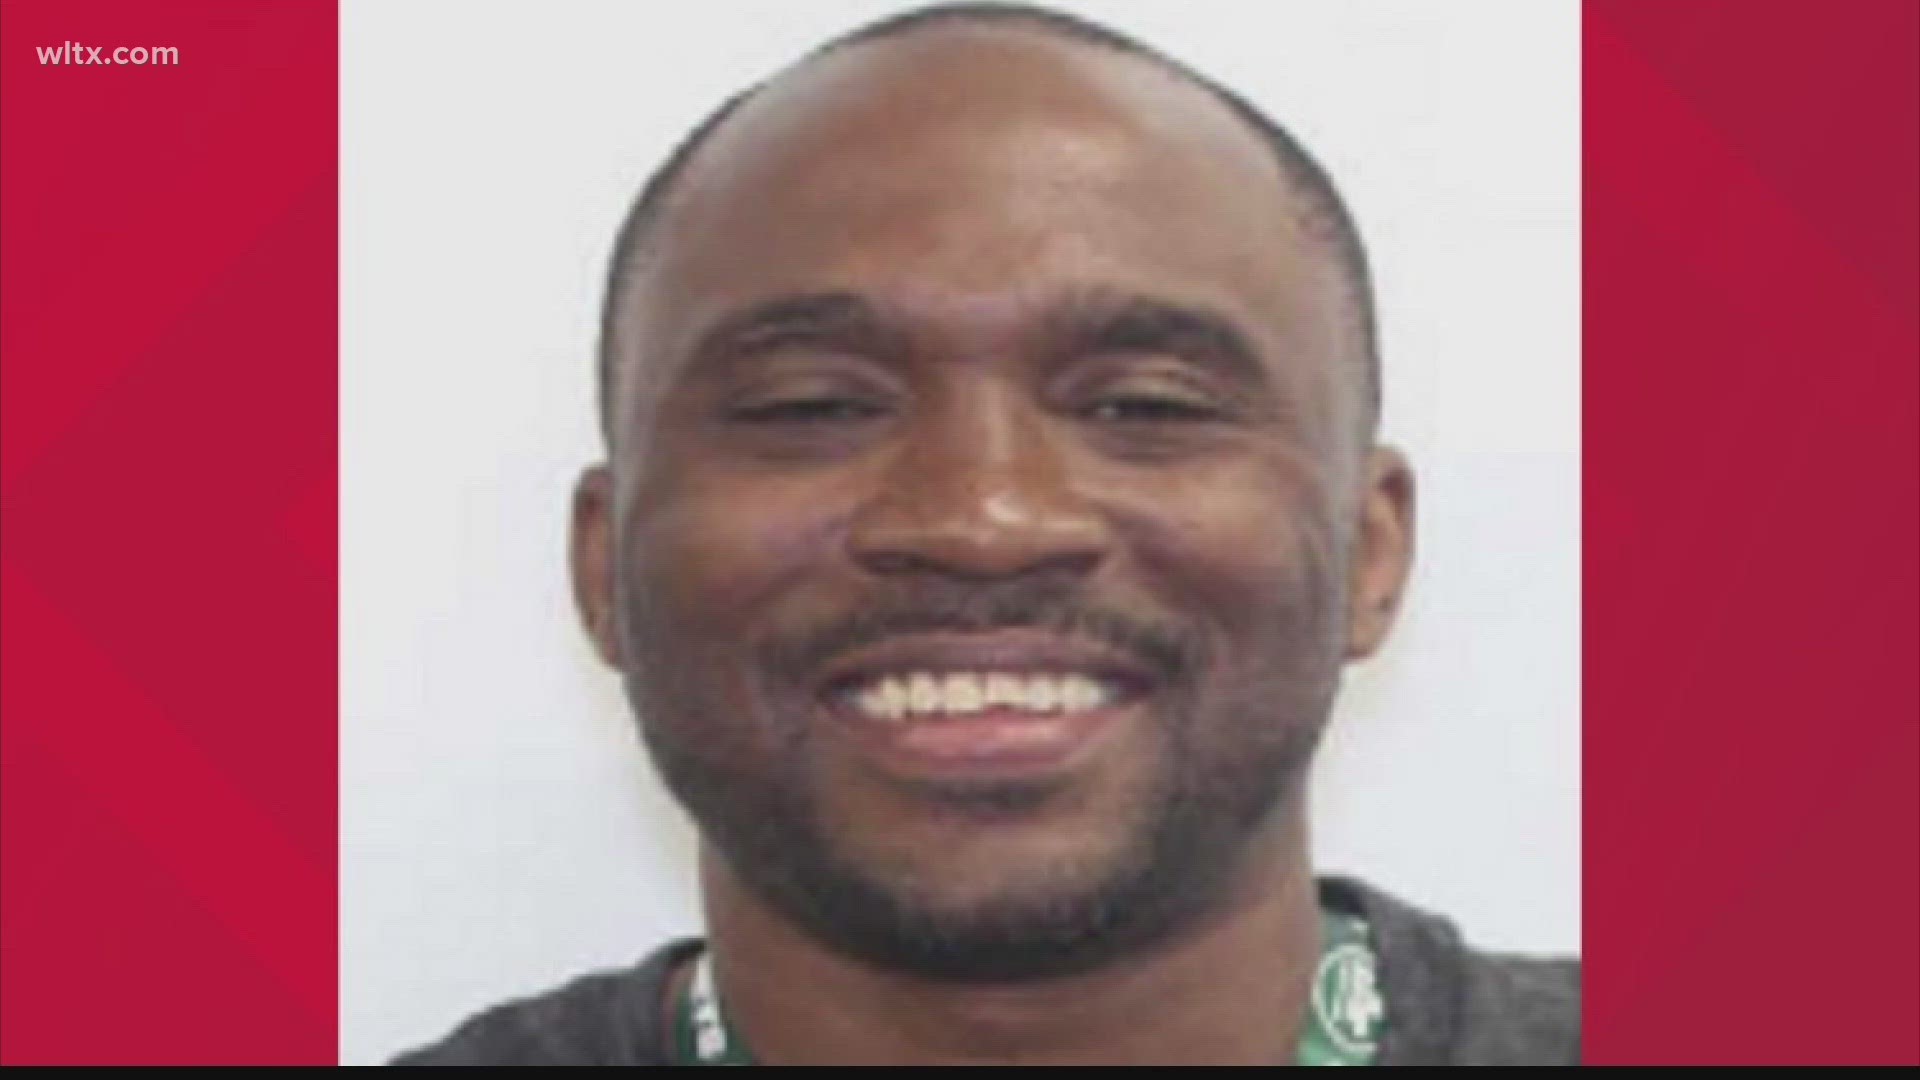 Search continues for convicted killer Jeriod Price, who was released in a deal, and now authorities want him back and are offering $30,000.